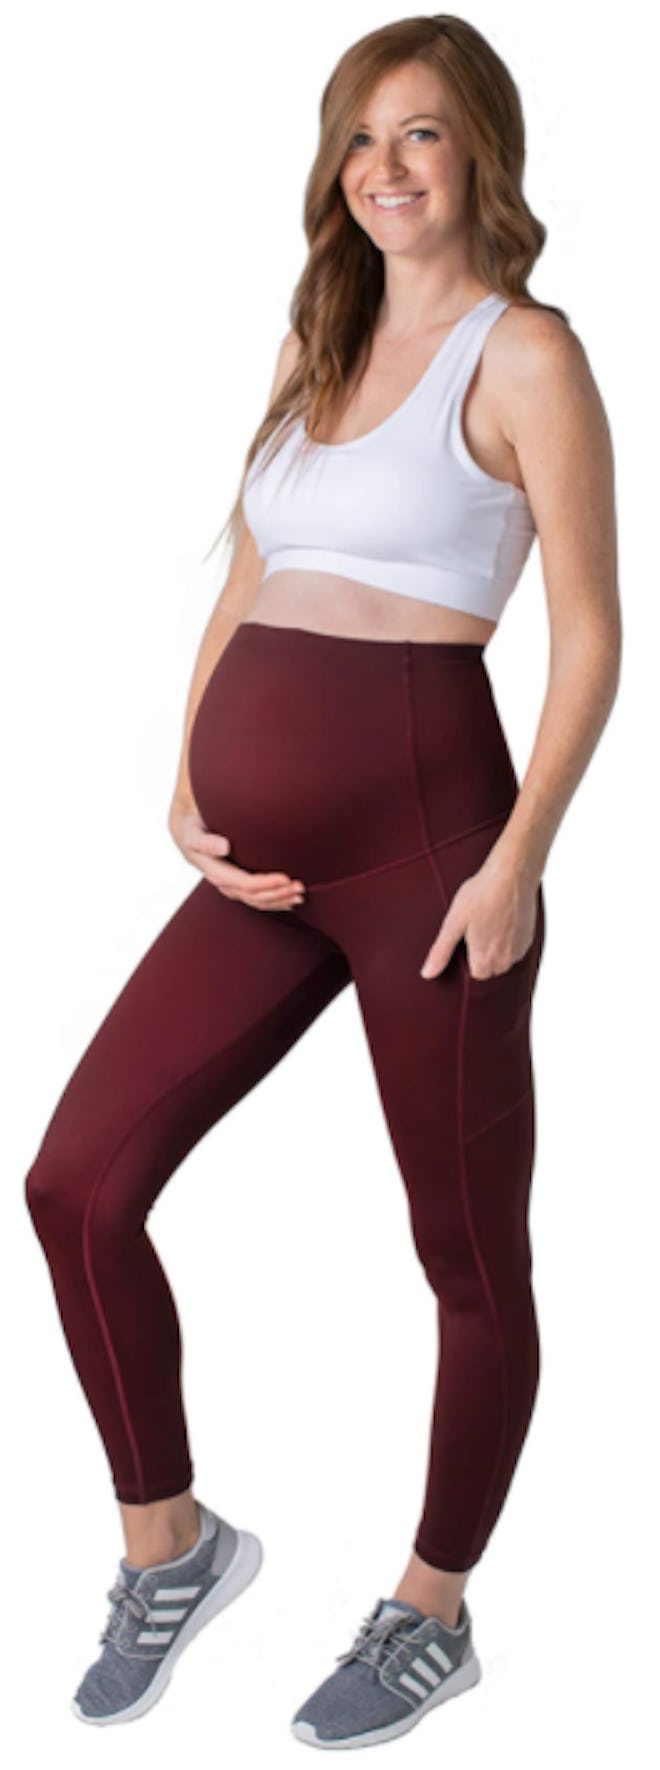 Compression tights for pregnant women – do they REALLY work?